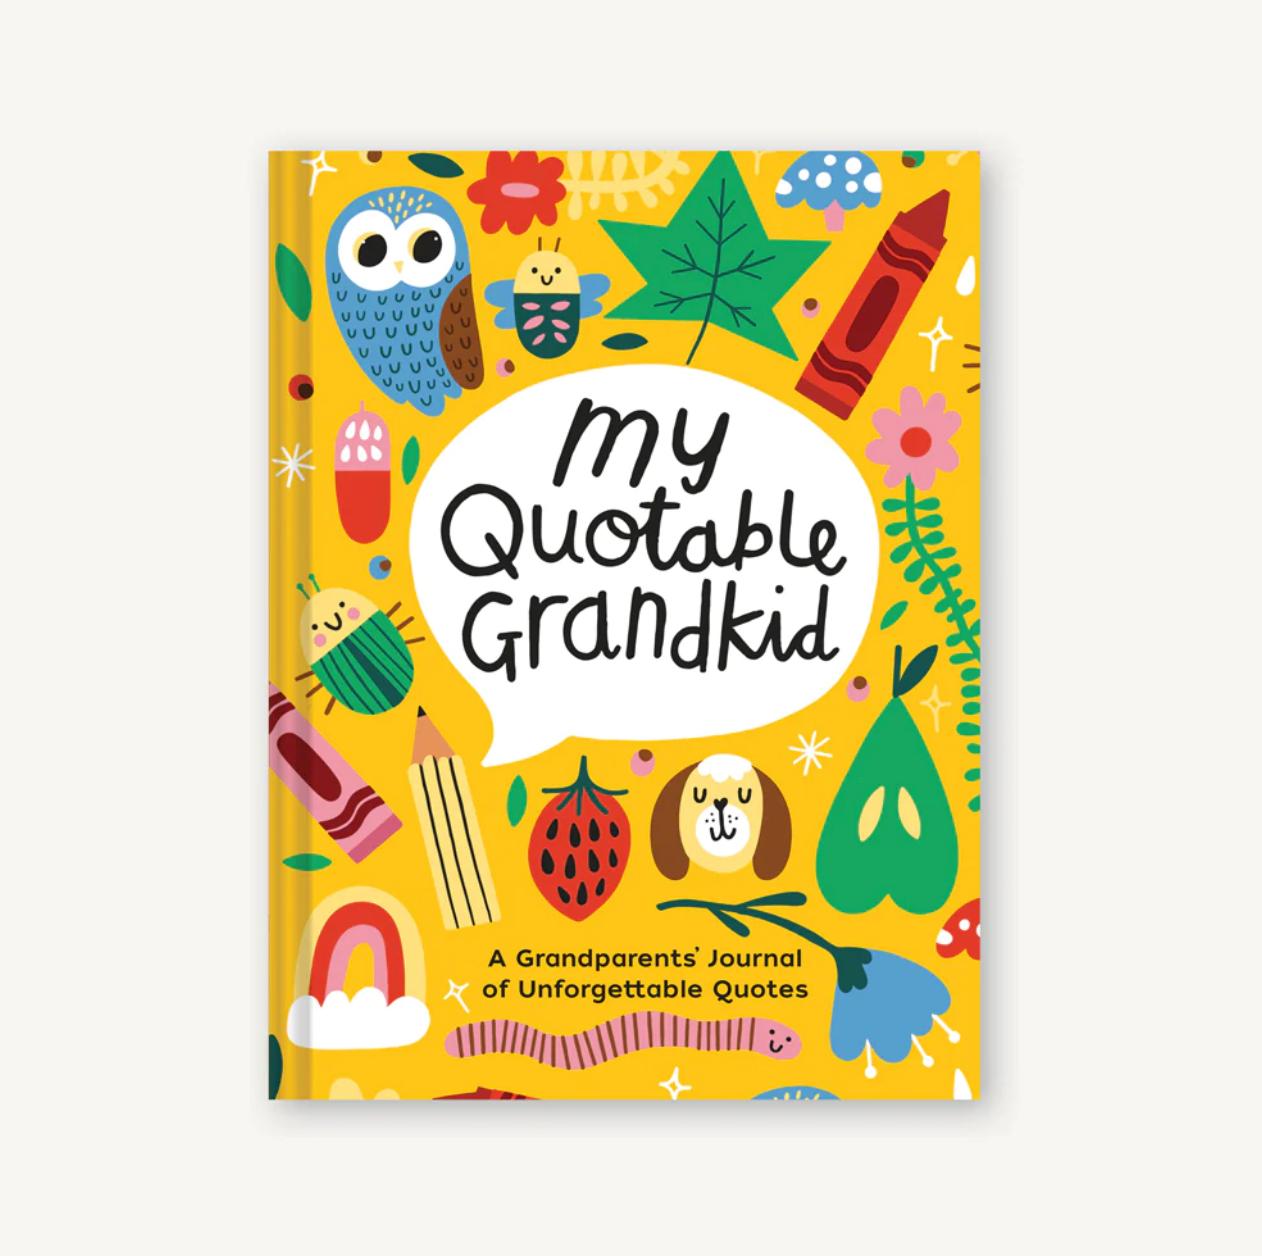 Playful My Quotable Grandkid: A Grandparents Journal of Unforgettable Quotes